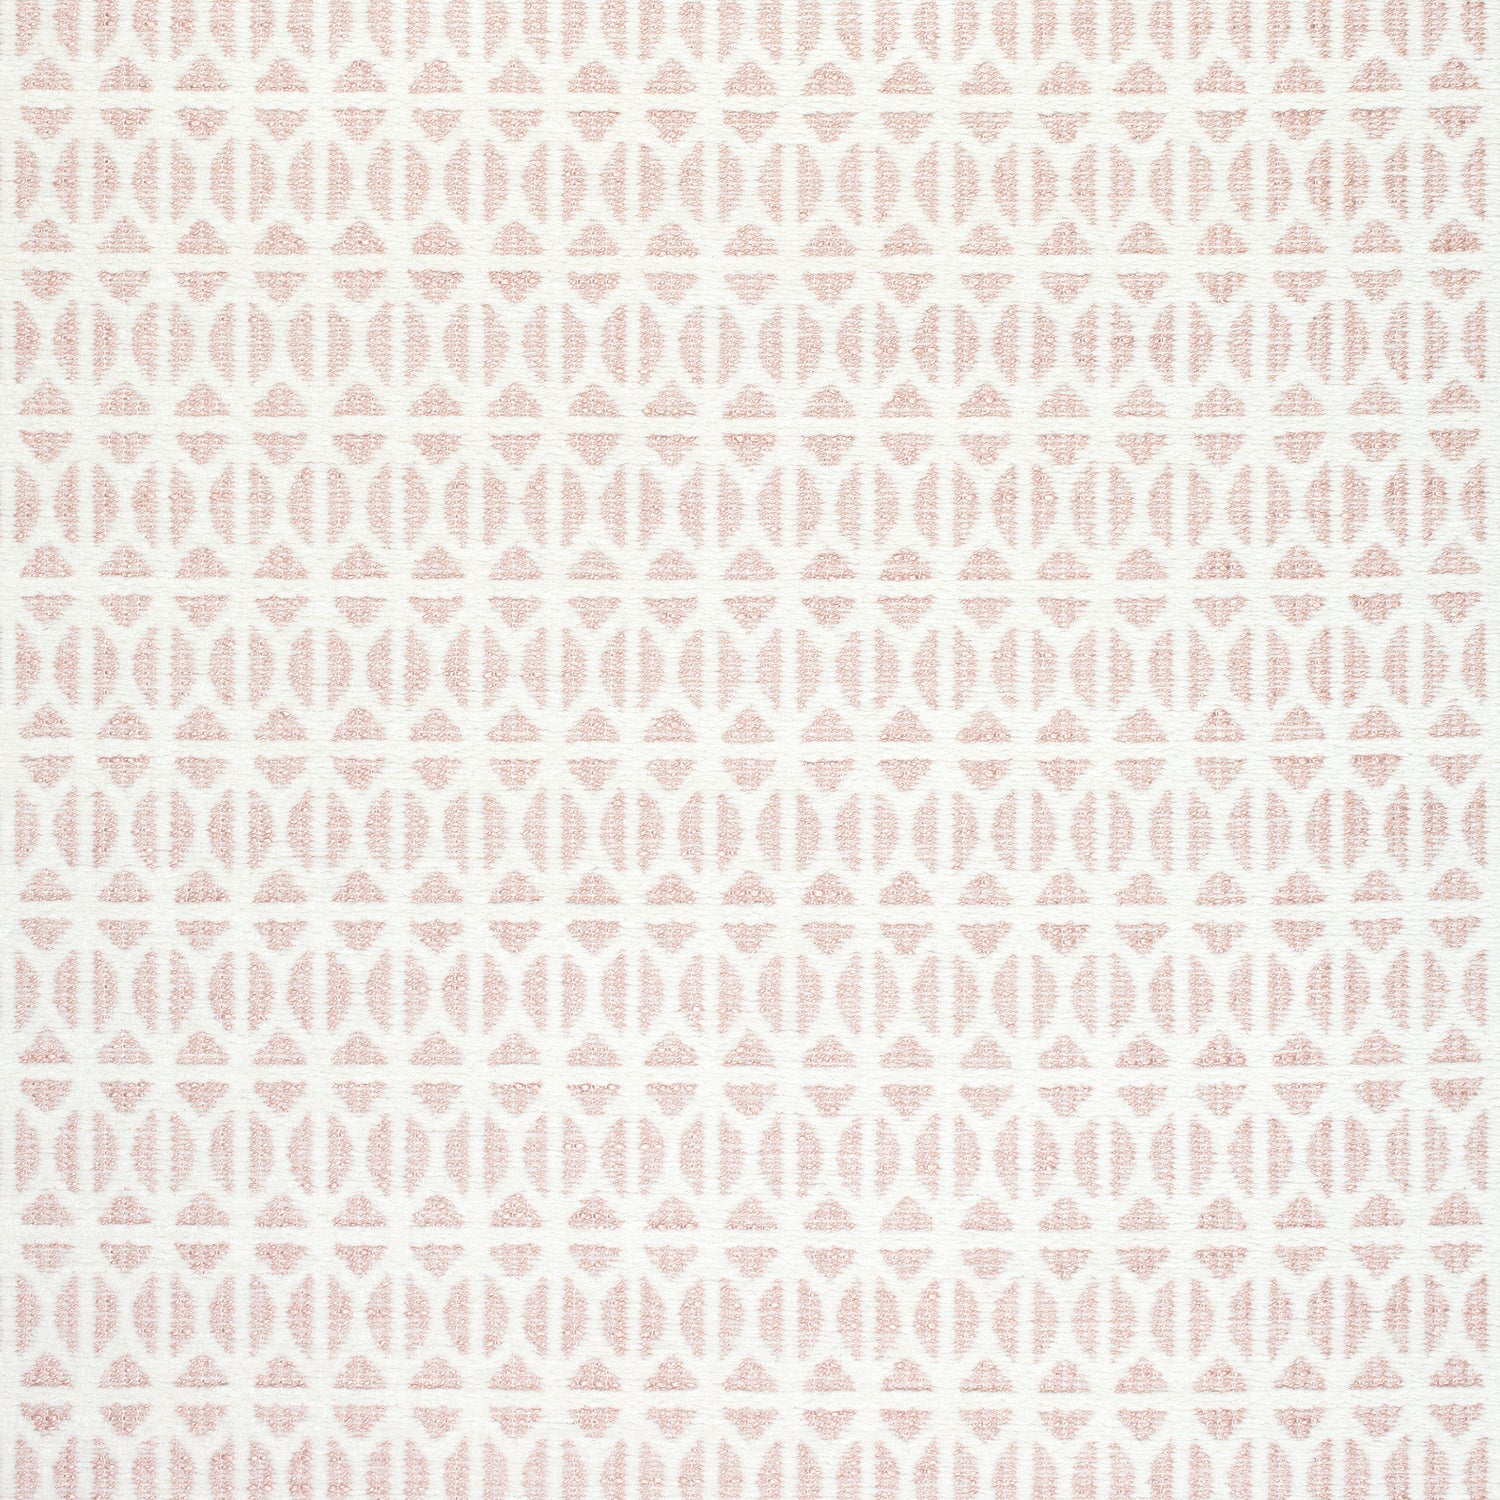 Quinlan fabric in blush color - pattern number W789106 - by Thibaut in the Reverie collection